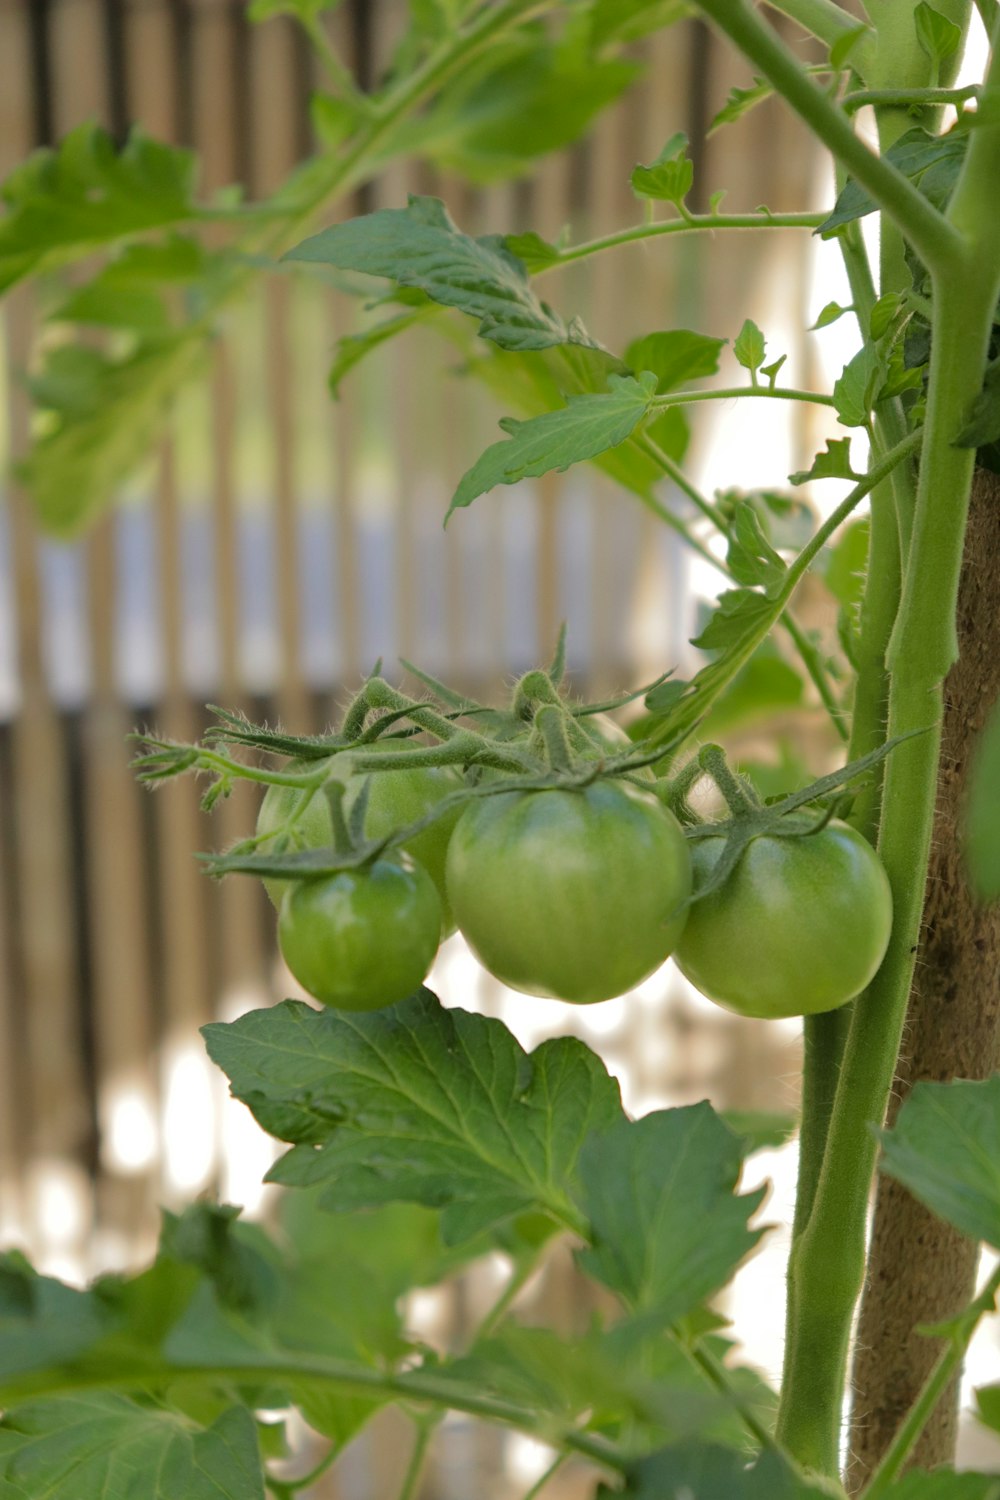 green tomatoes growing on a plant in a garden